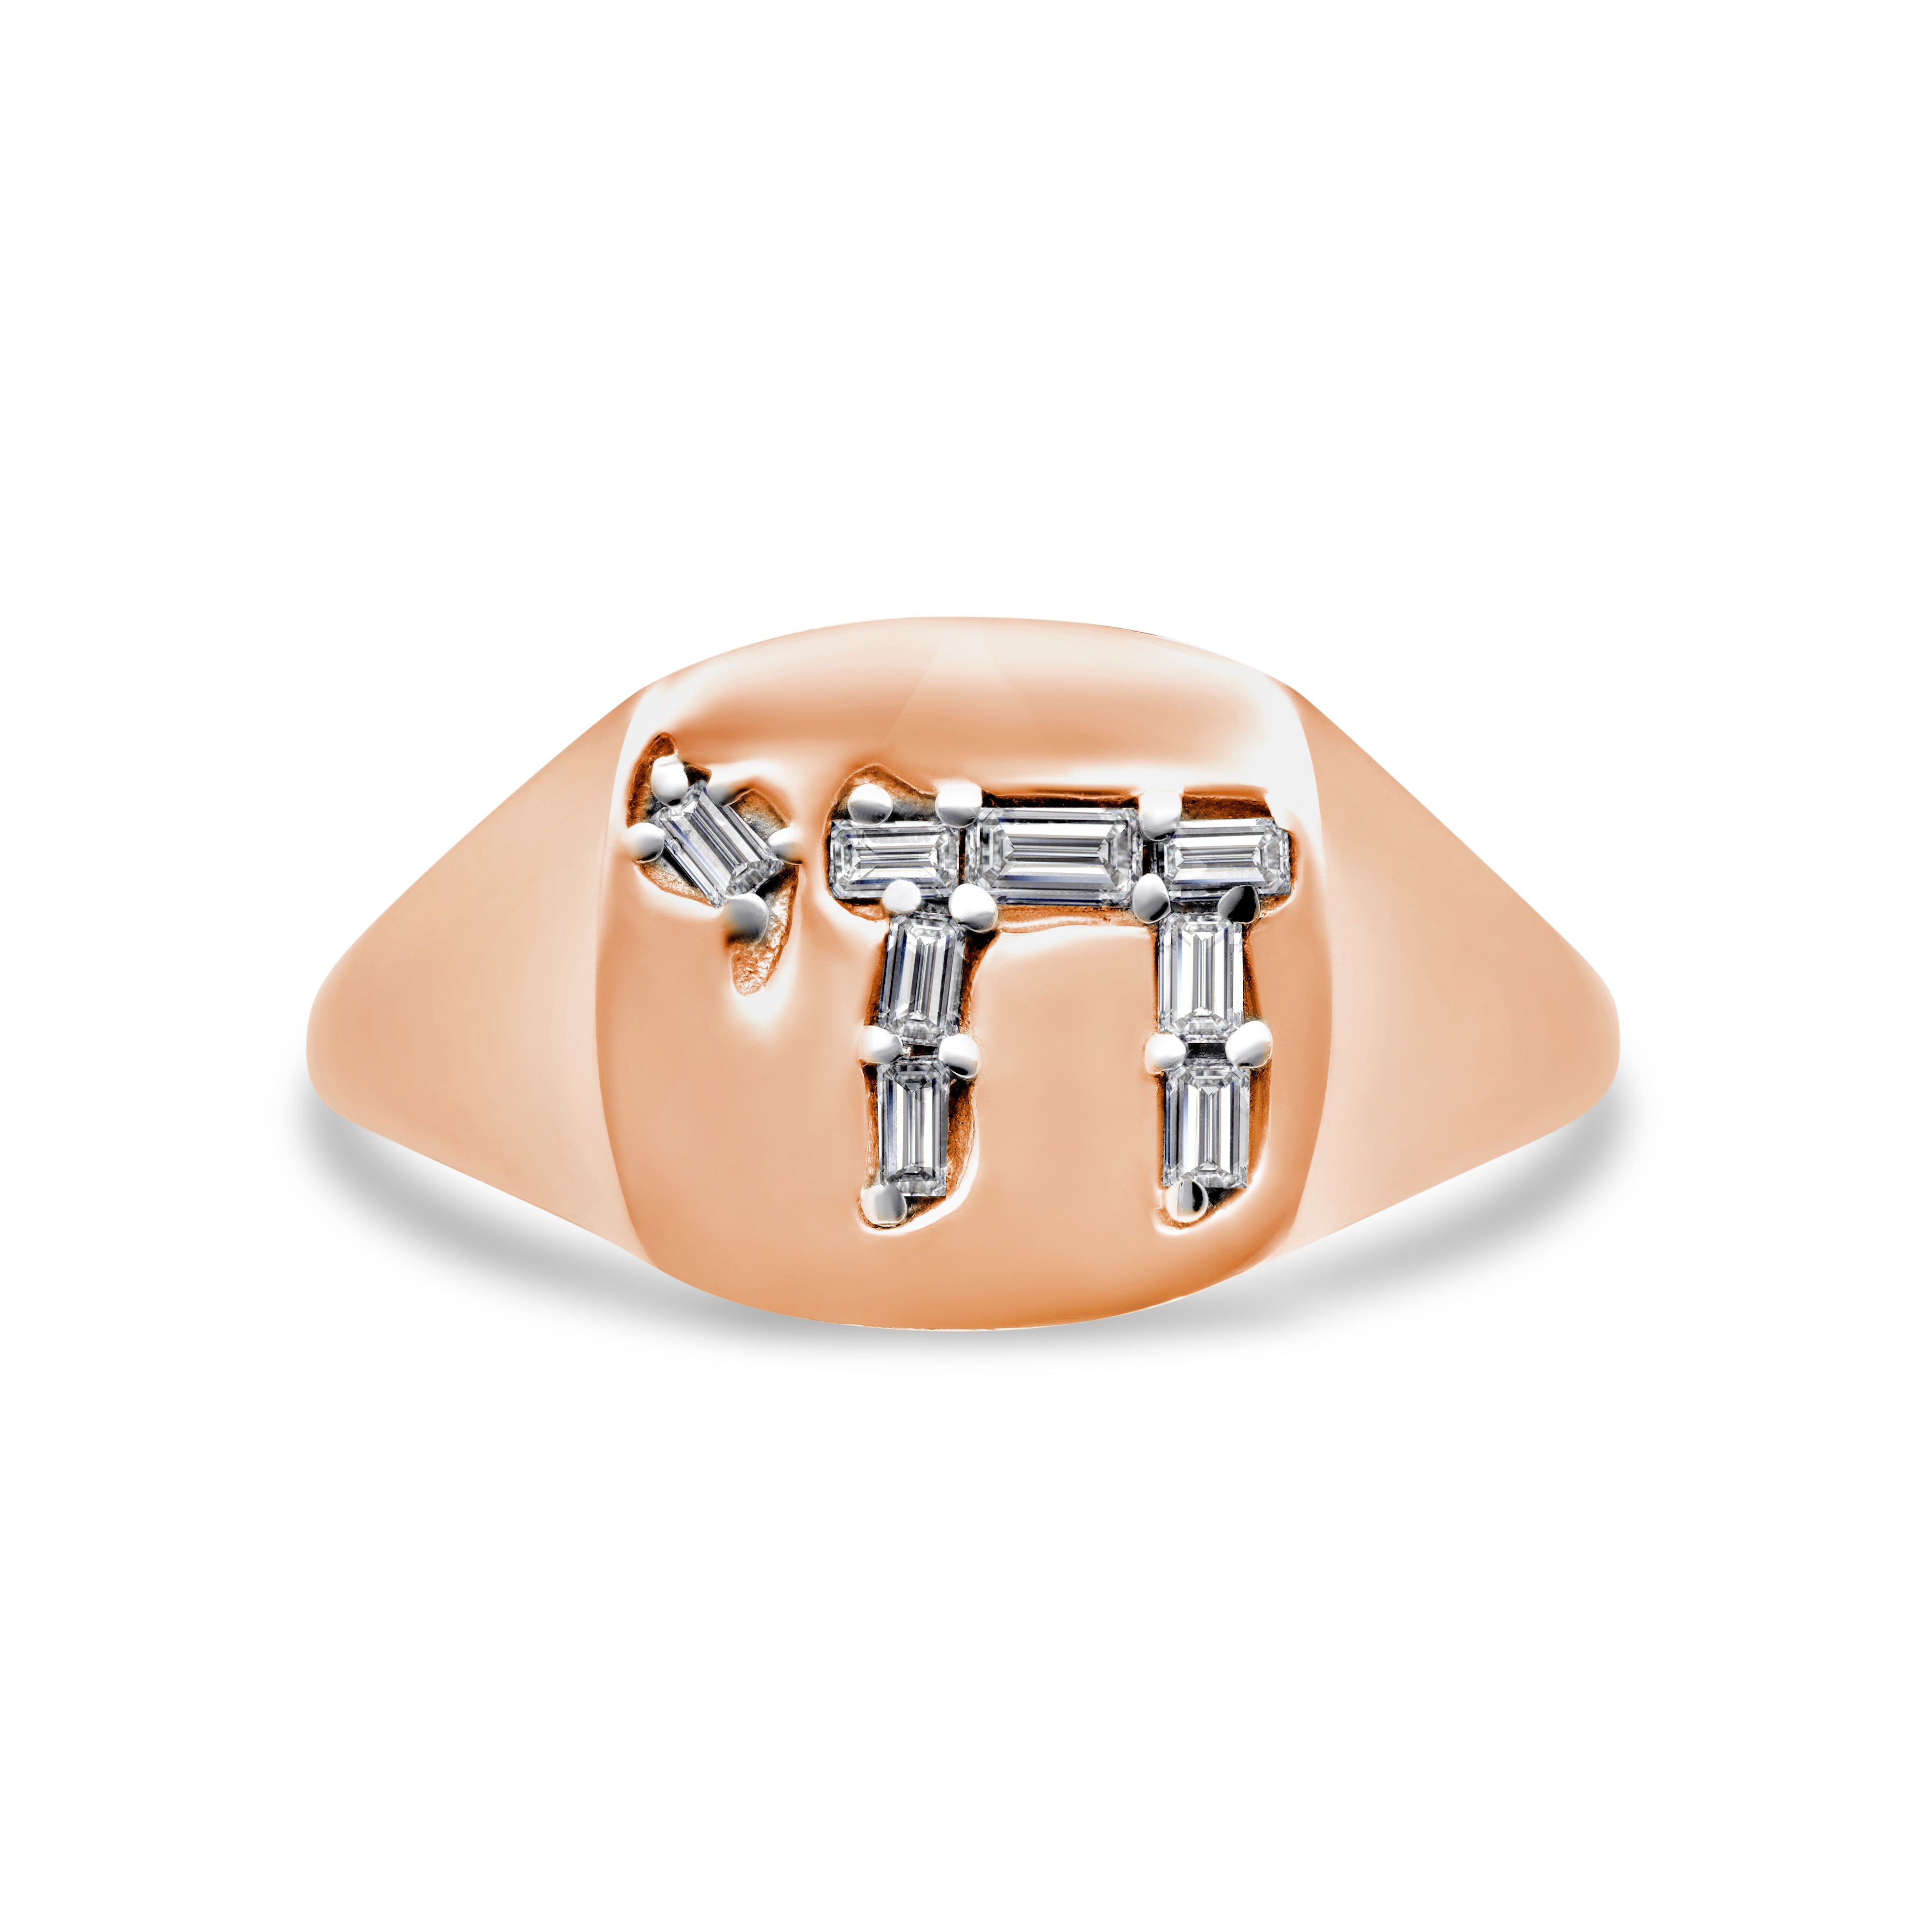 The L'Chaim Signet Pinky Ring